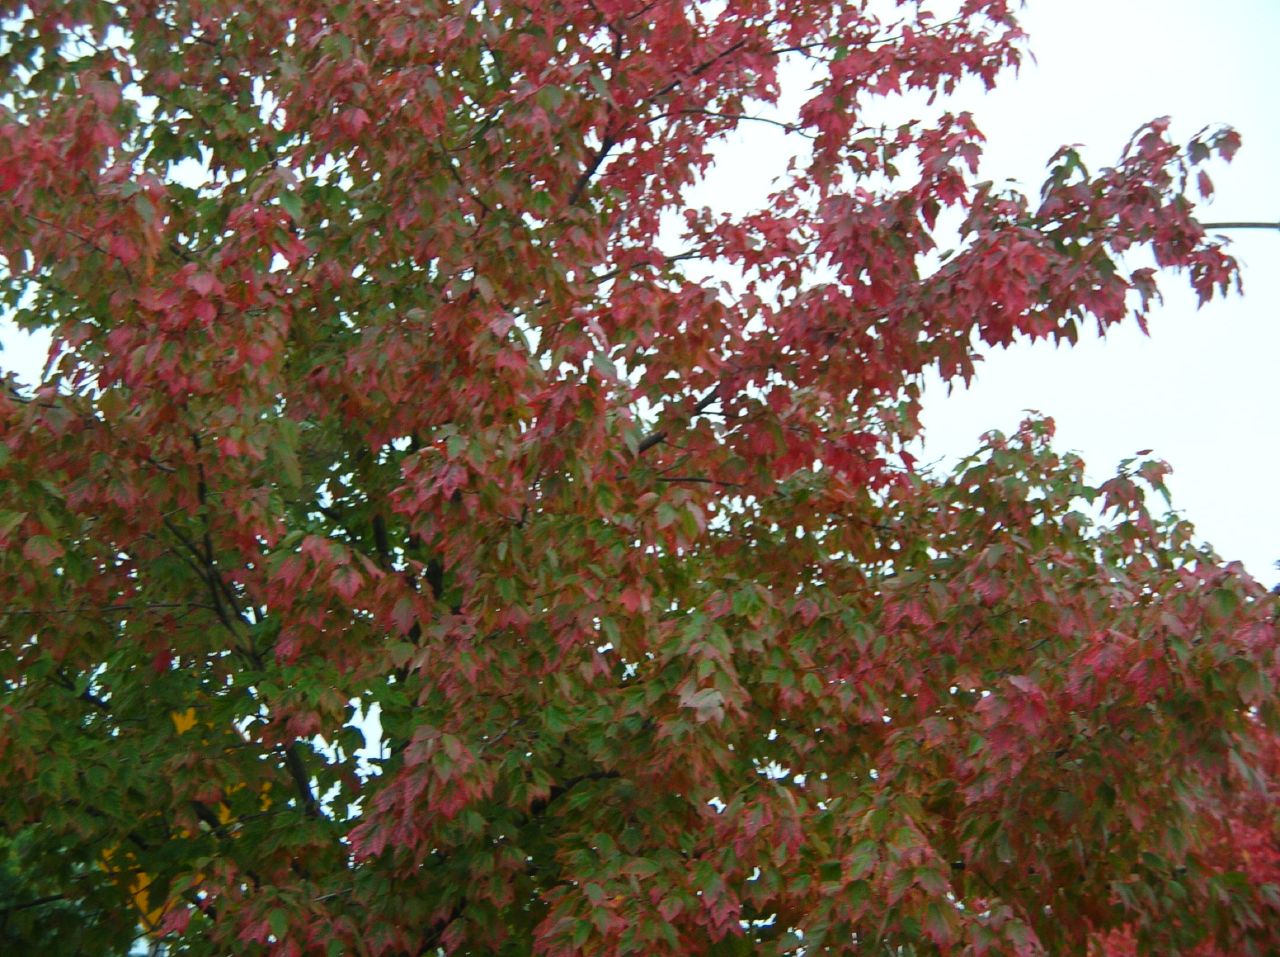 bright red foliage in the distance and trees in front